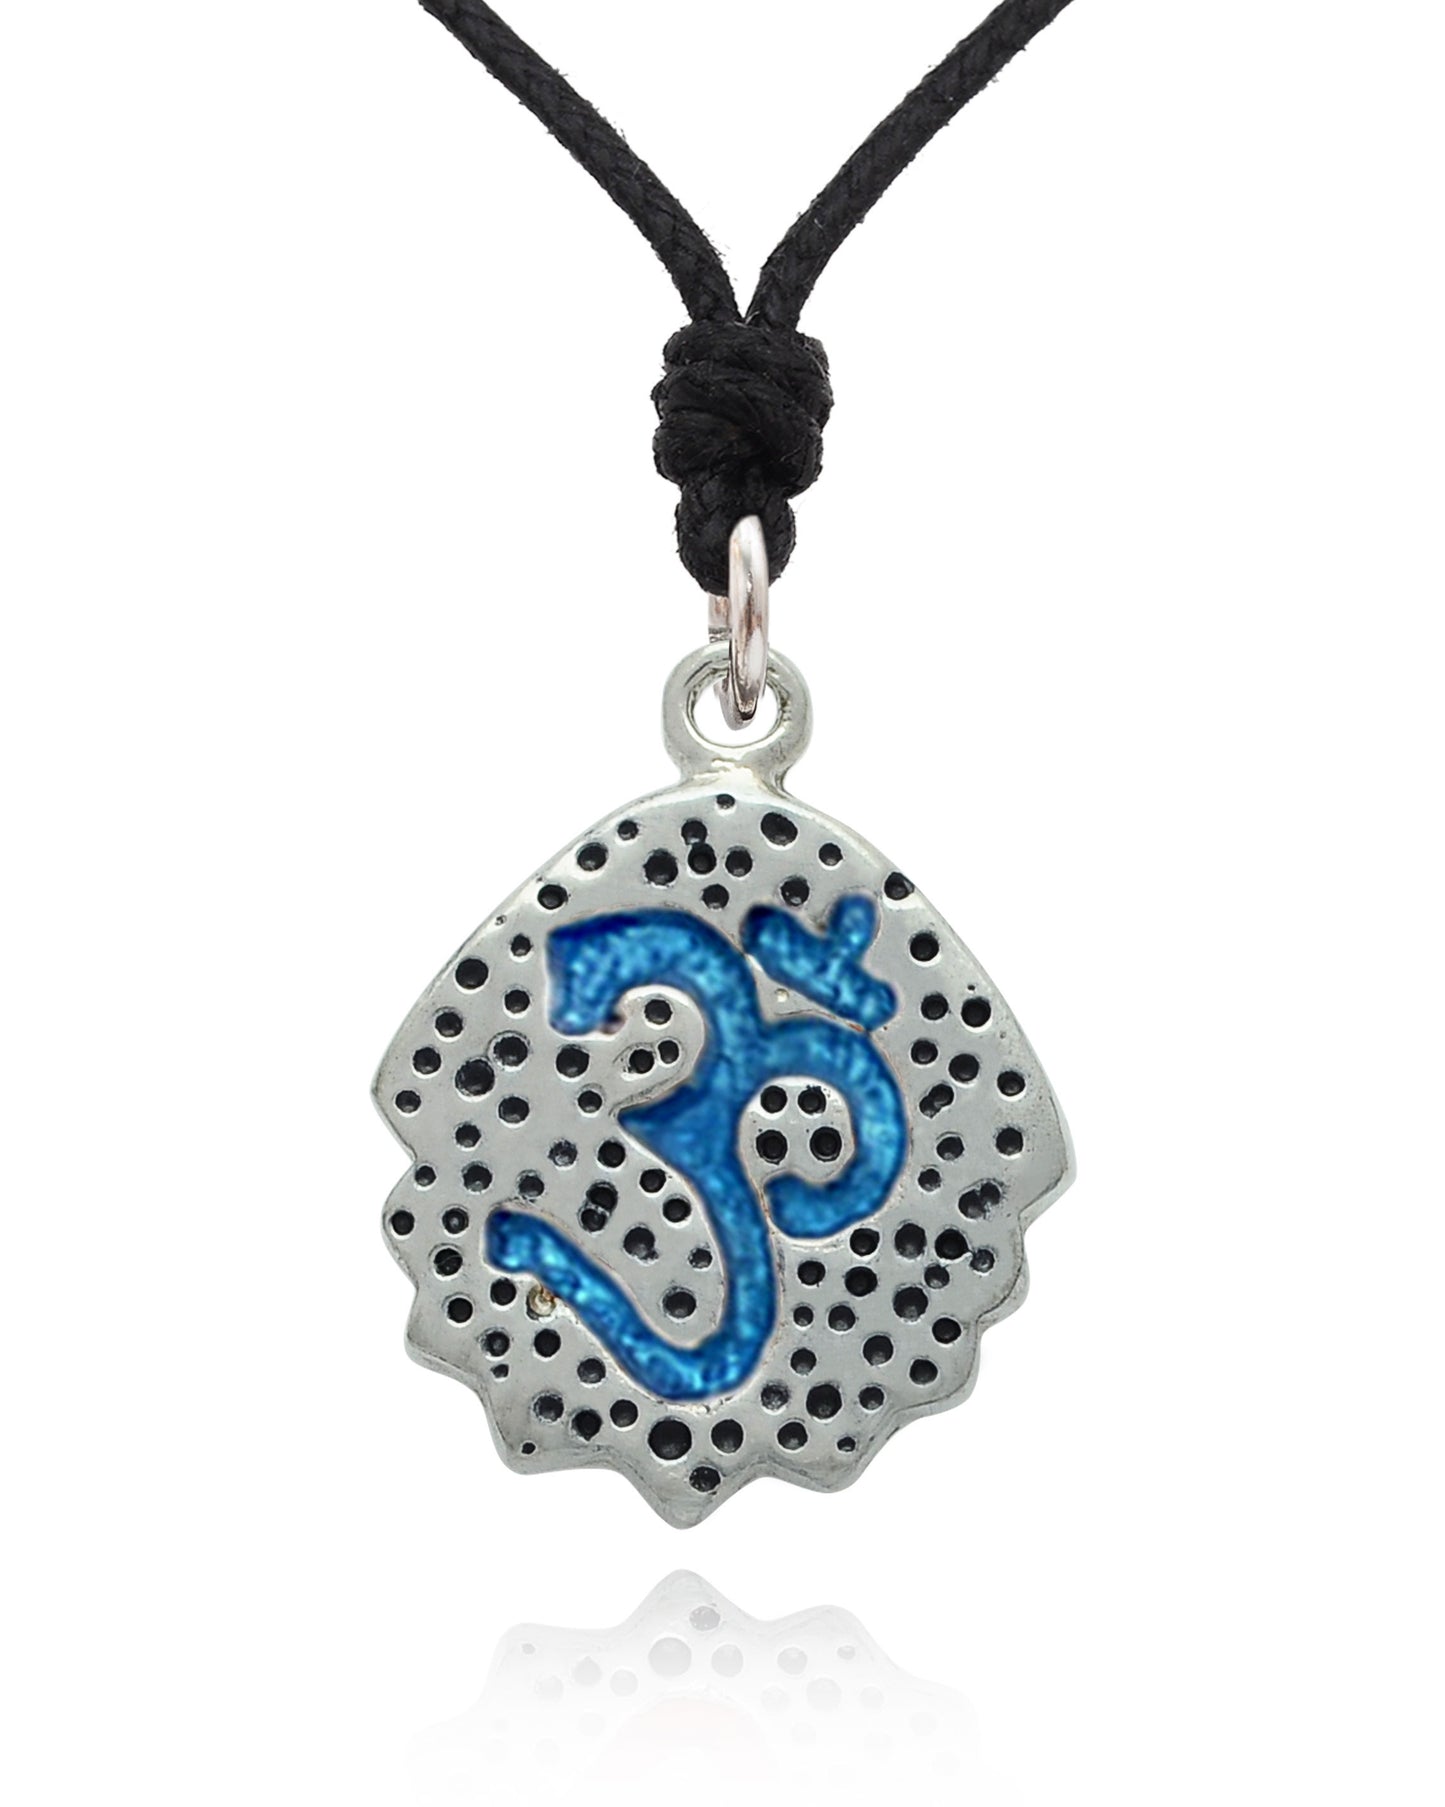 New Classy Hindu Symbol Silver Pewter Charm Necklace Pendant Jewelry